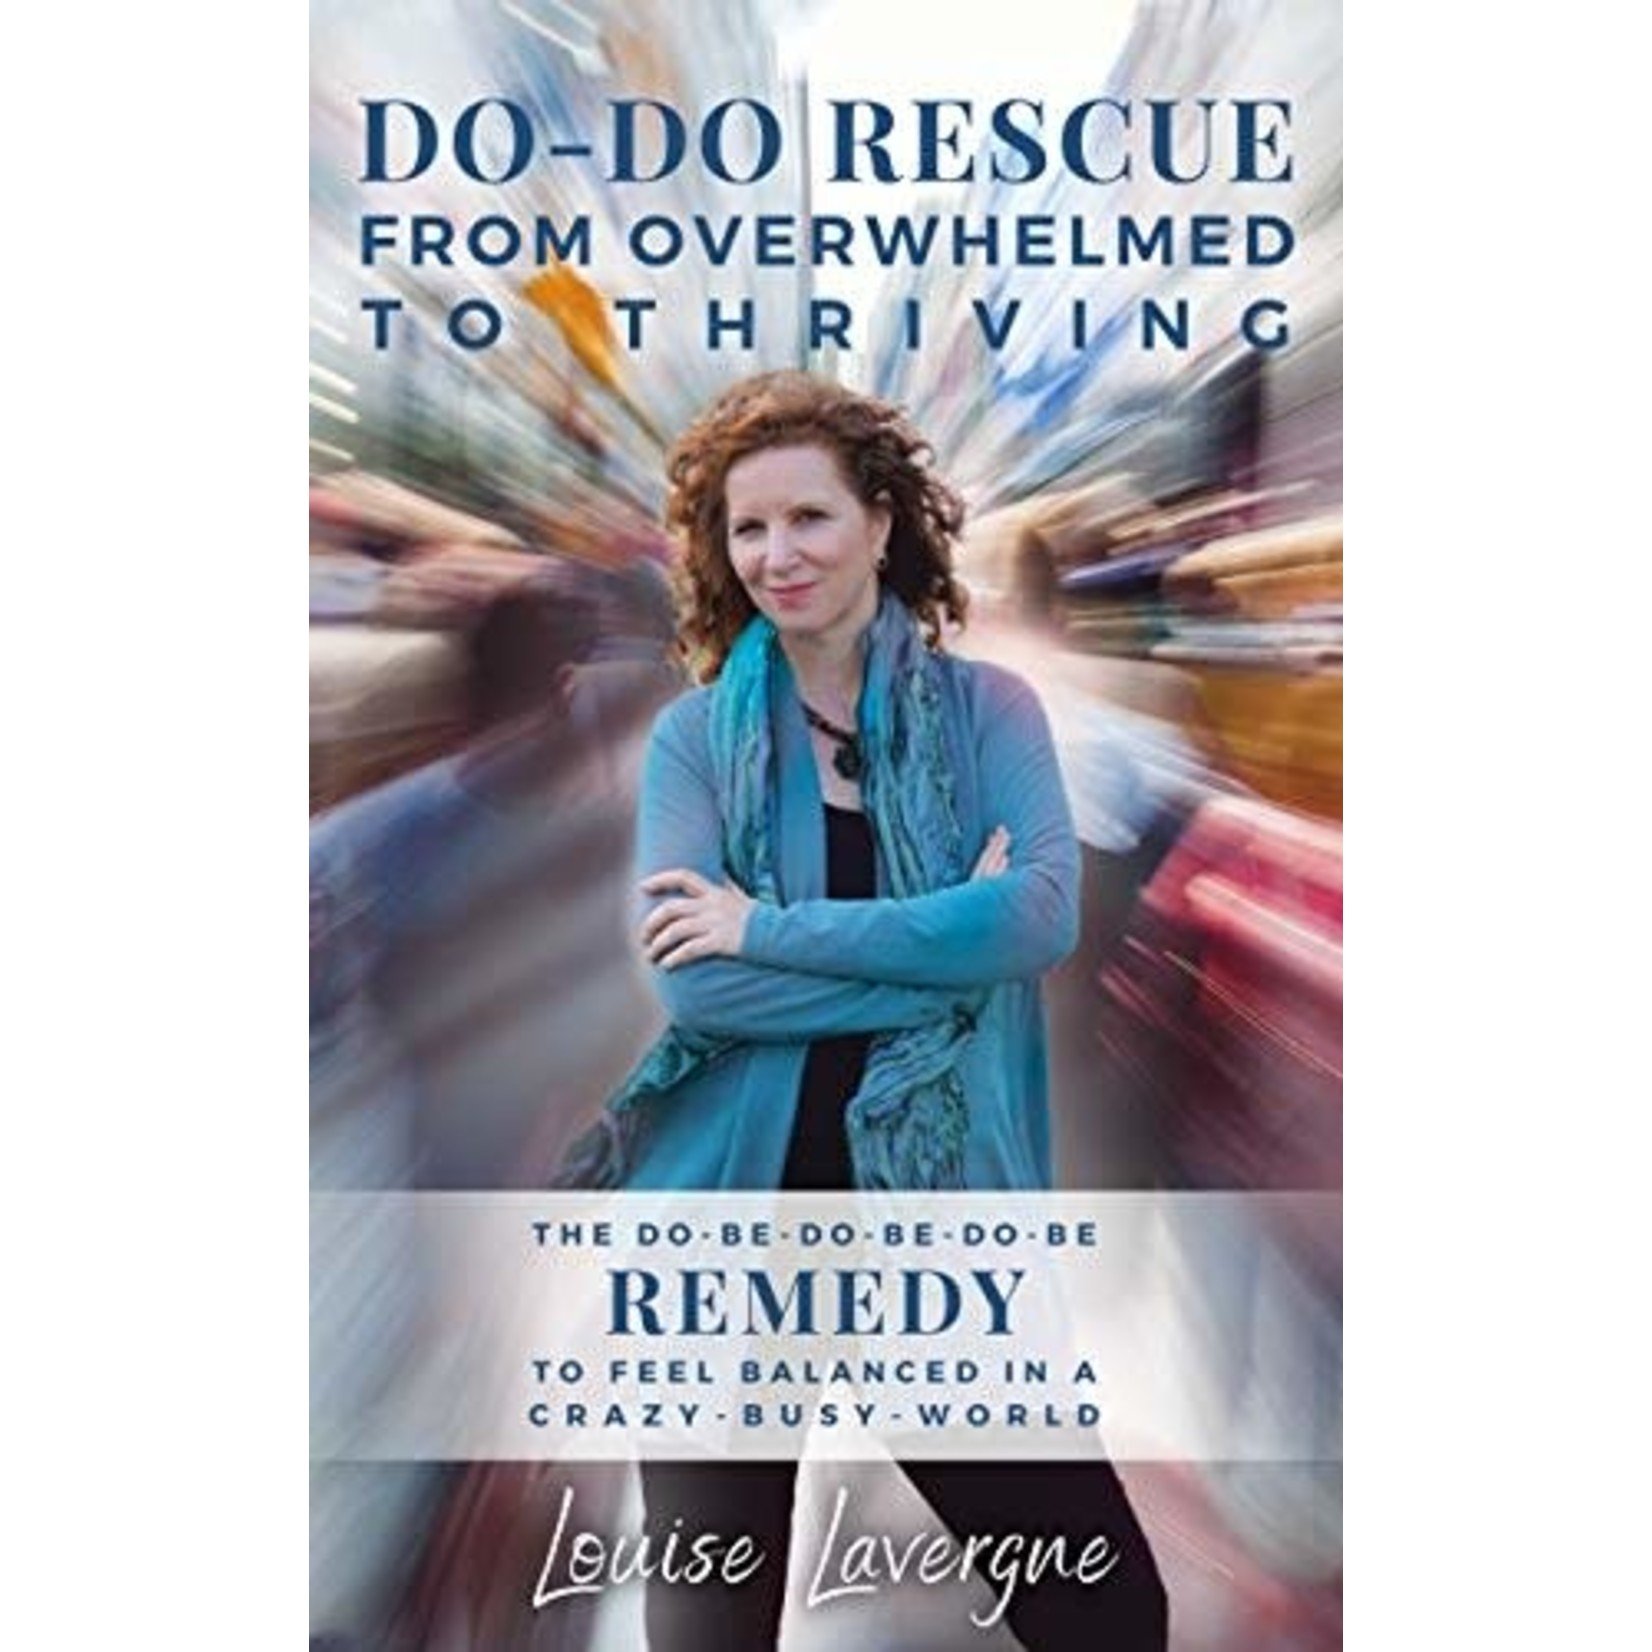 Do-Do Rescue by Louise Lavergne